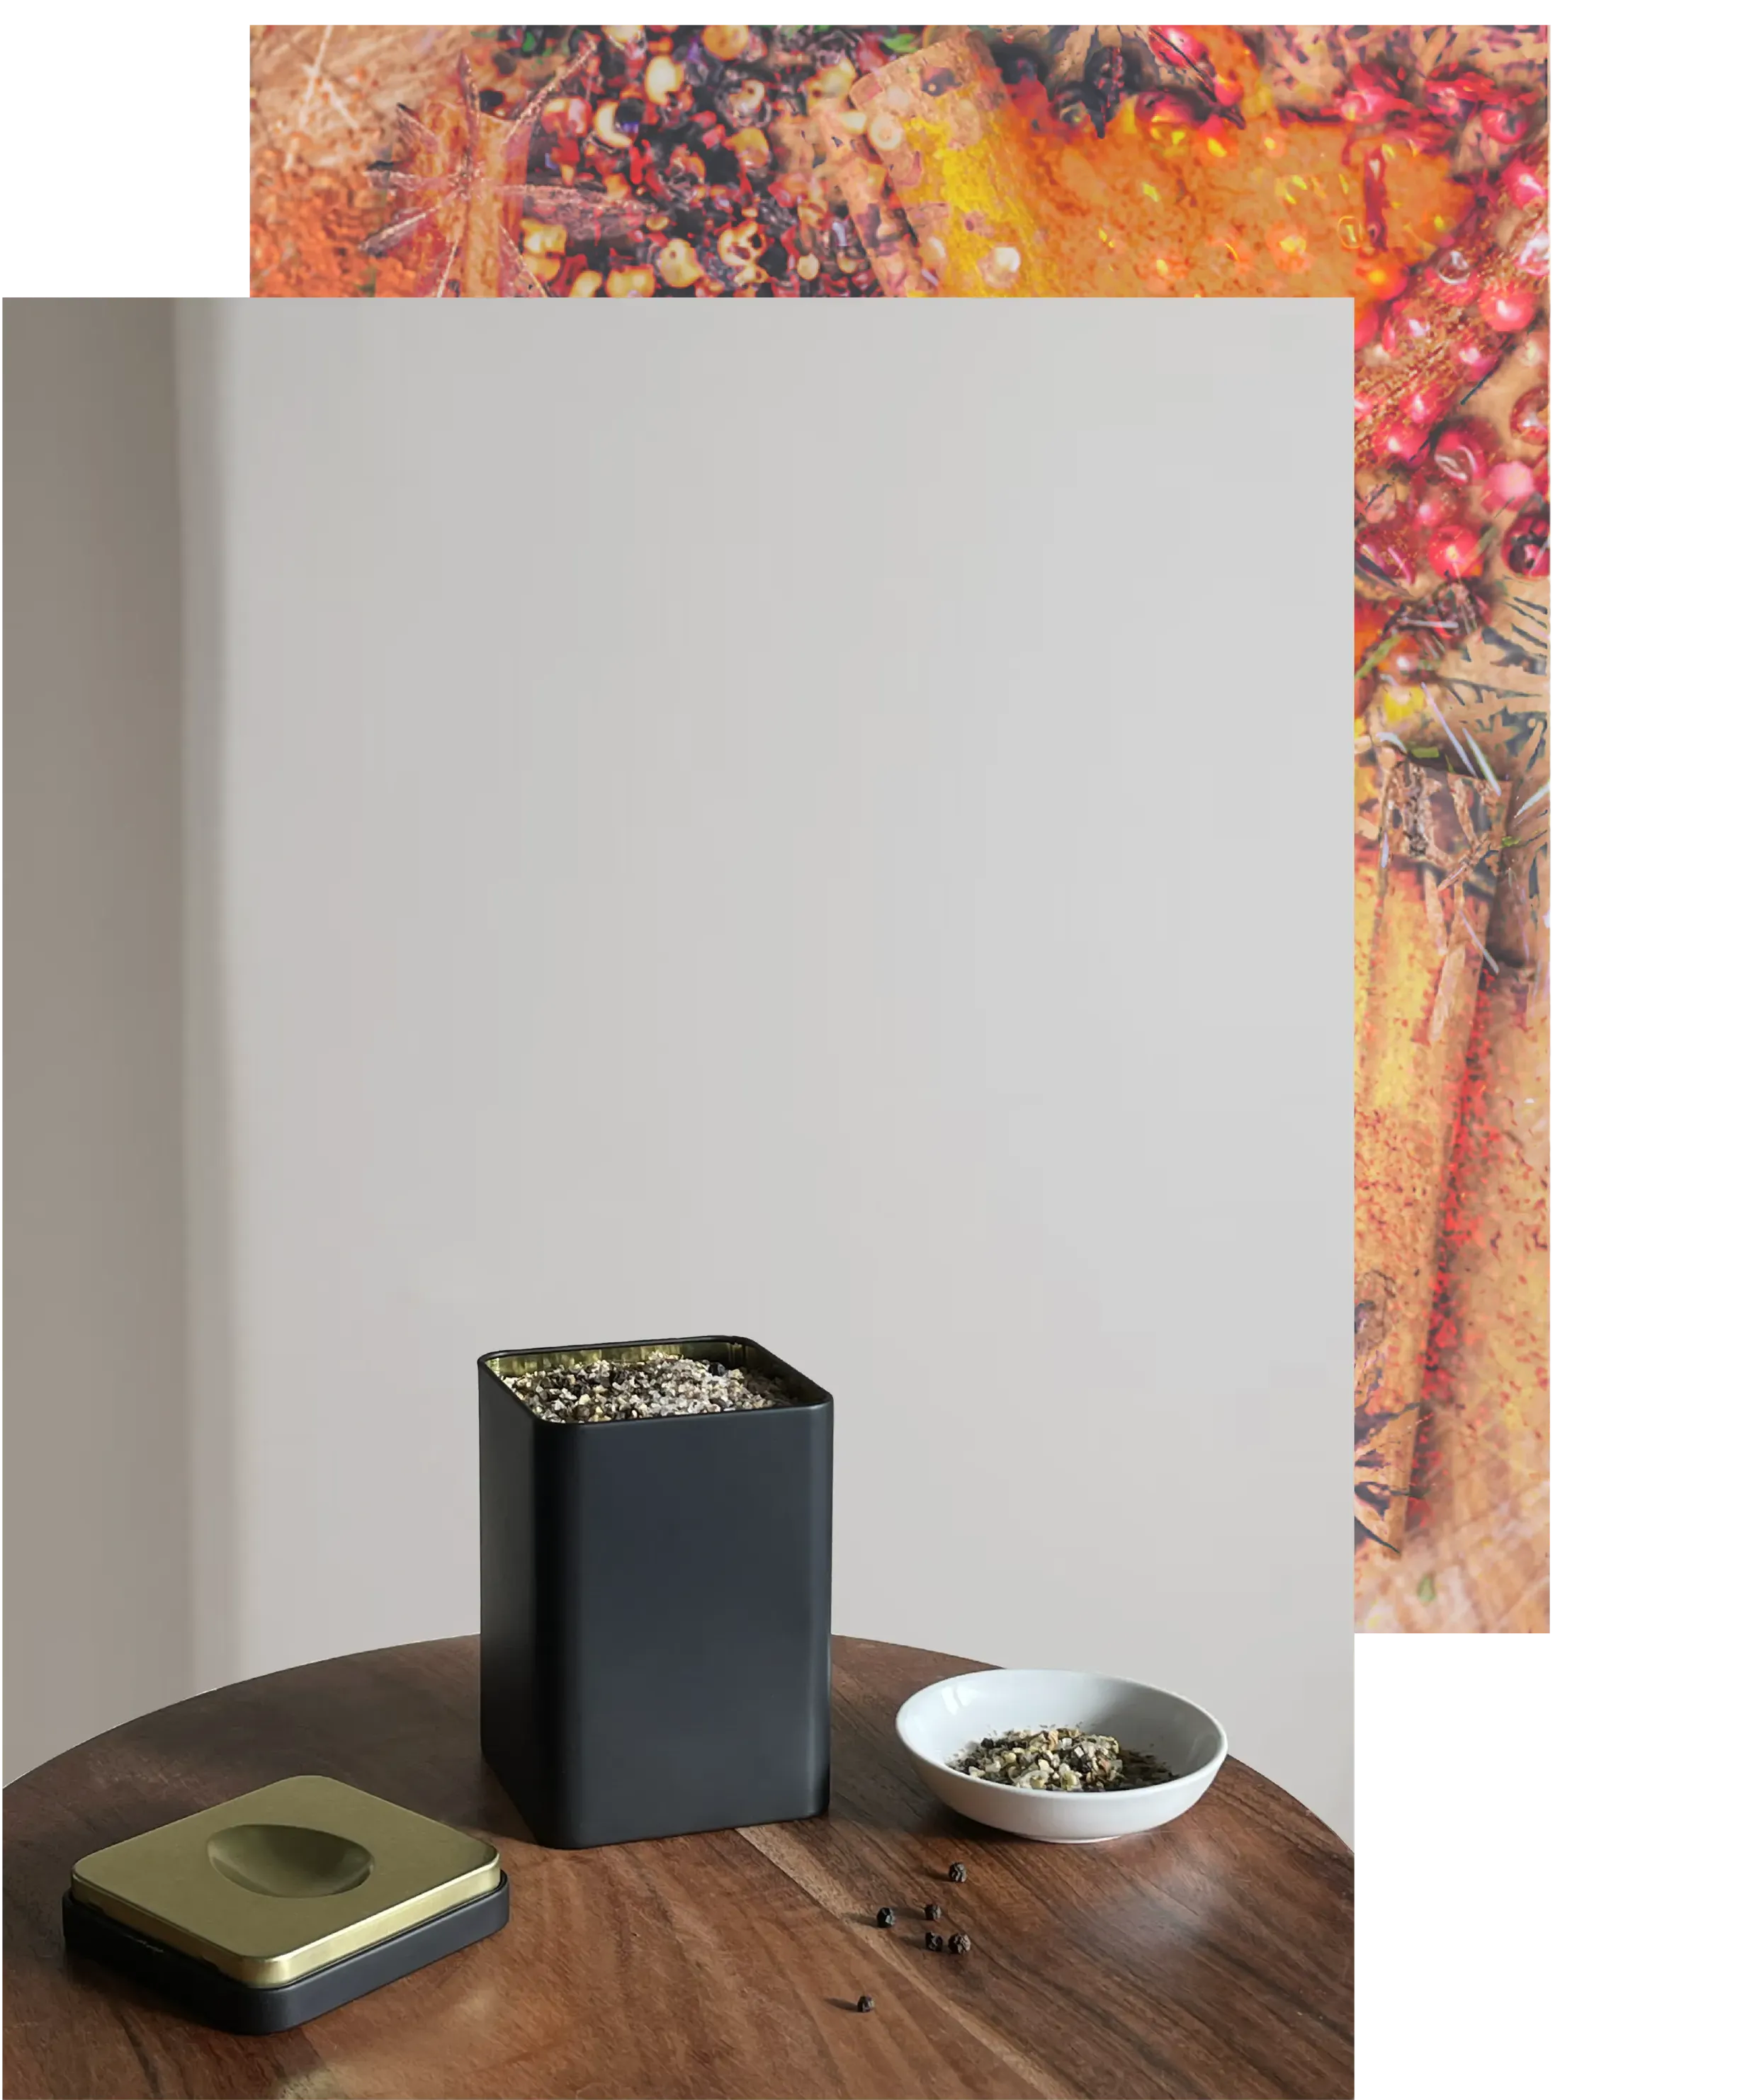 loose leaf tea packaging with holiday spice mix in tin with bowl on the right side on a wooden table the lid of the tin on the left side  loose pepper corn on the table. An image of a stylized mix of holiday spices is in the background.